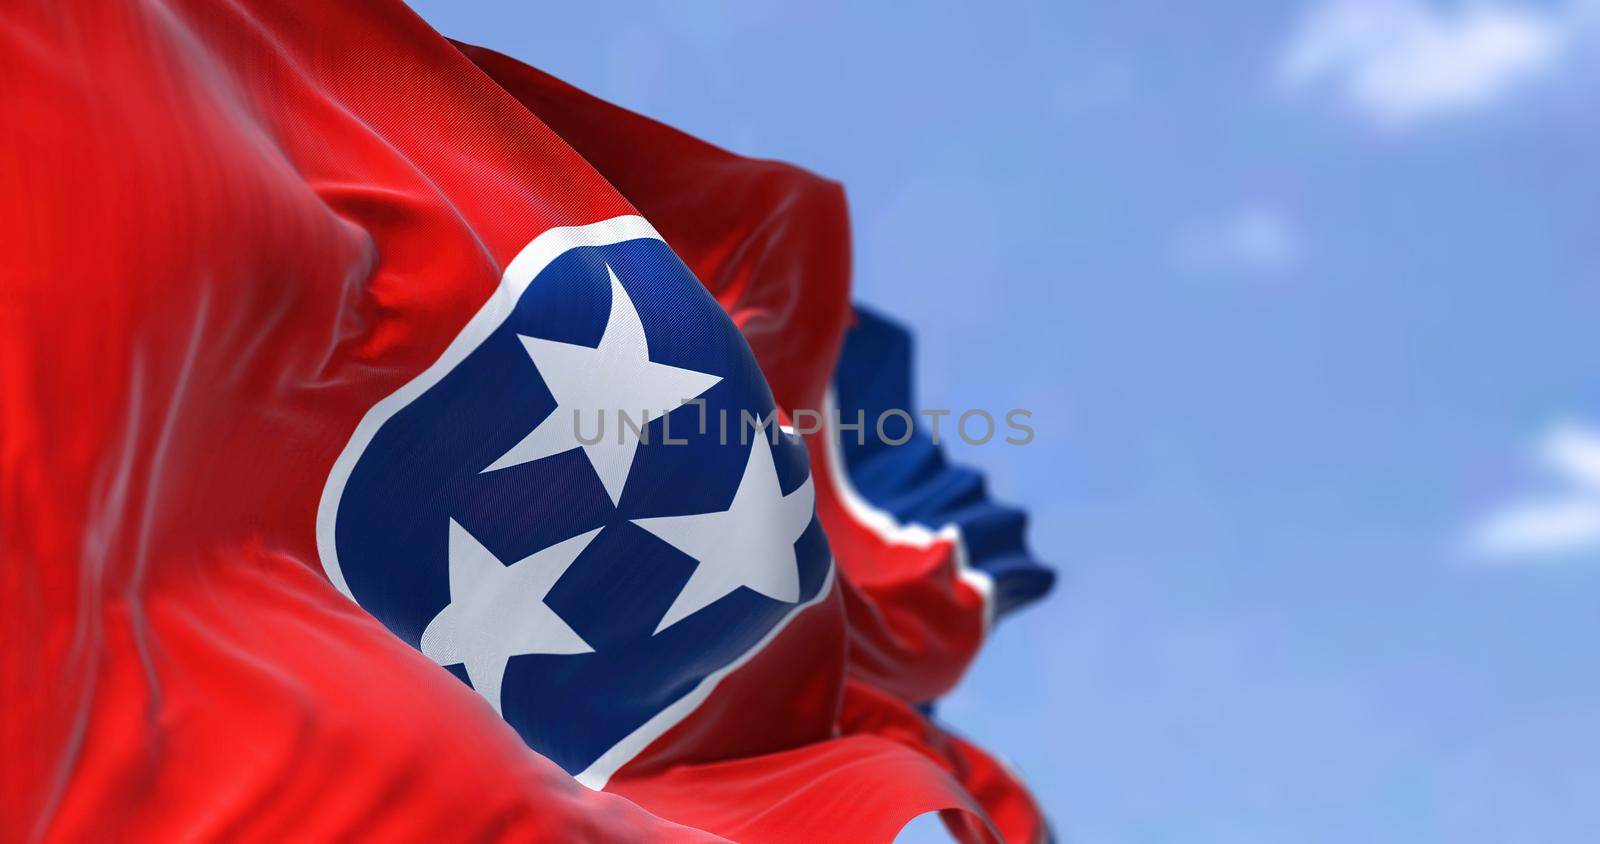 The US state flag of Tennessee waving in the wind by rarrarorro